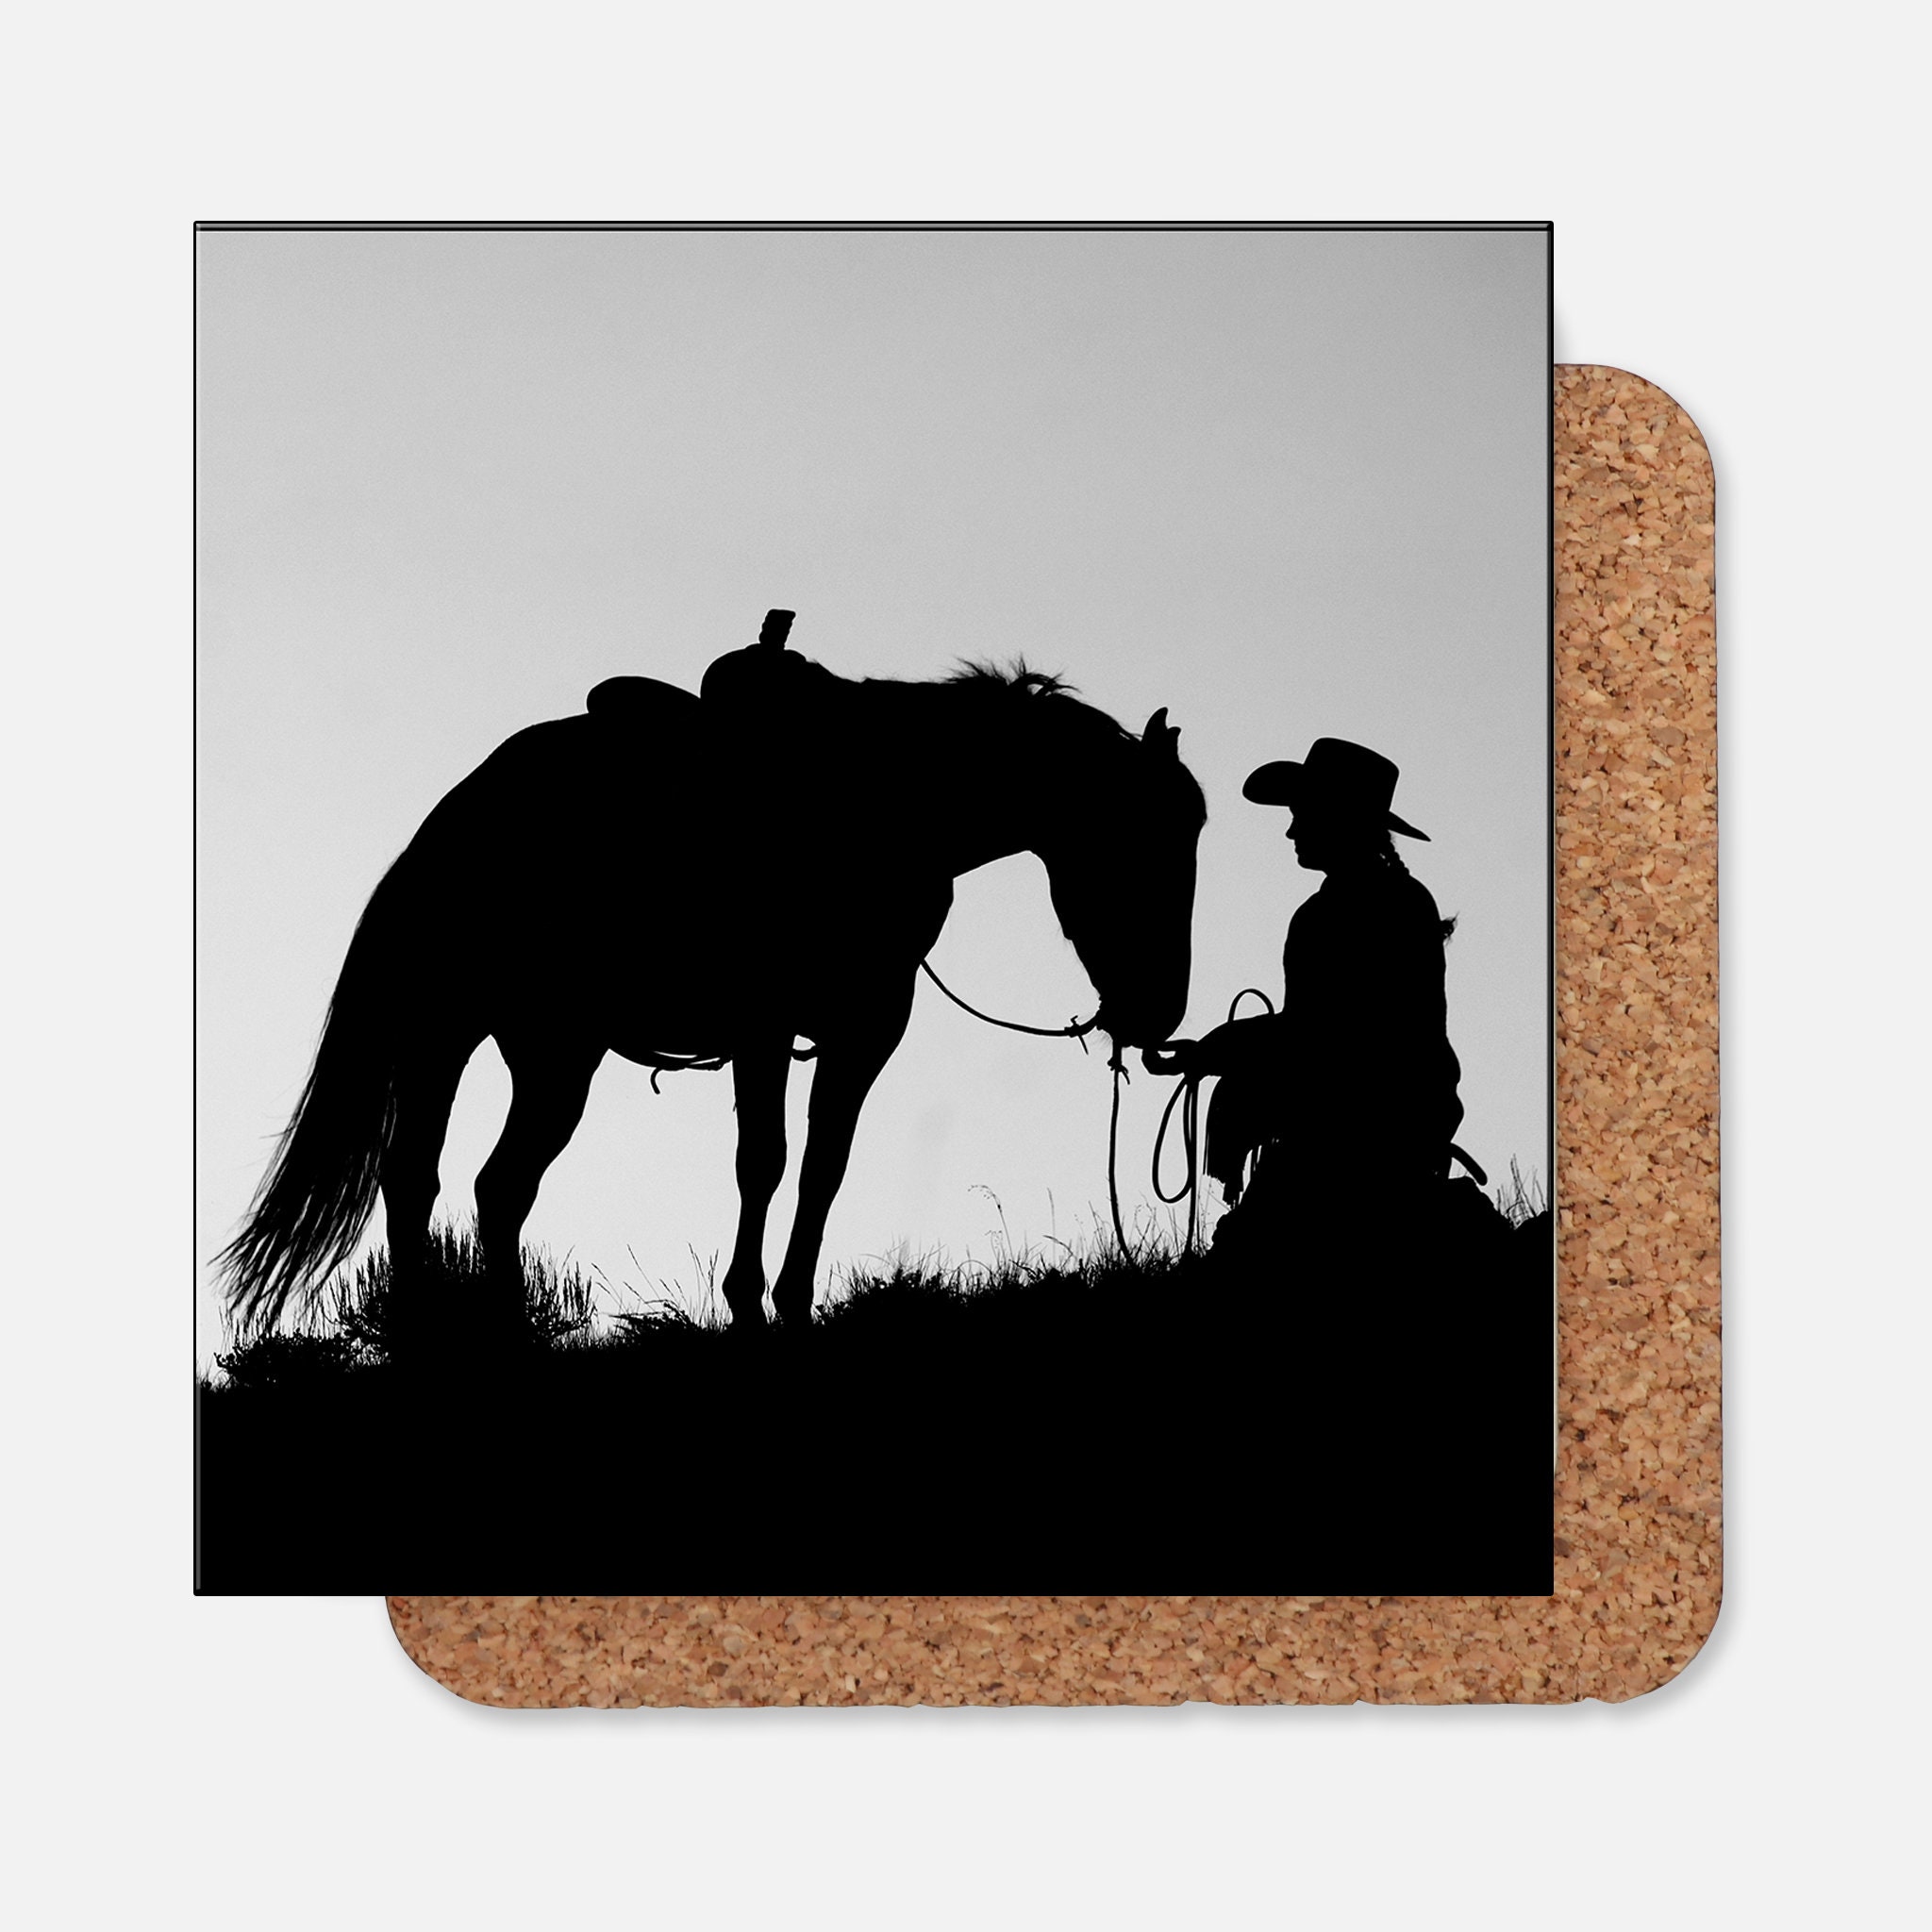 Cowboy and horse art Ceramic Drink Coasters 